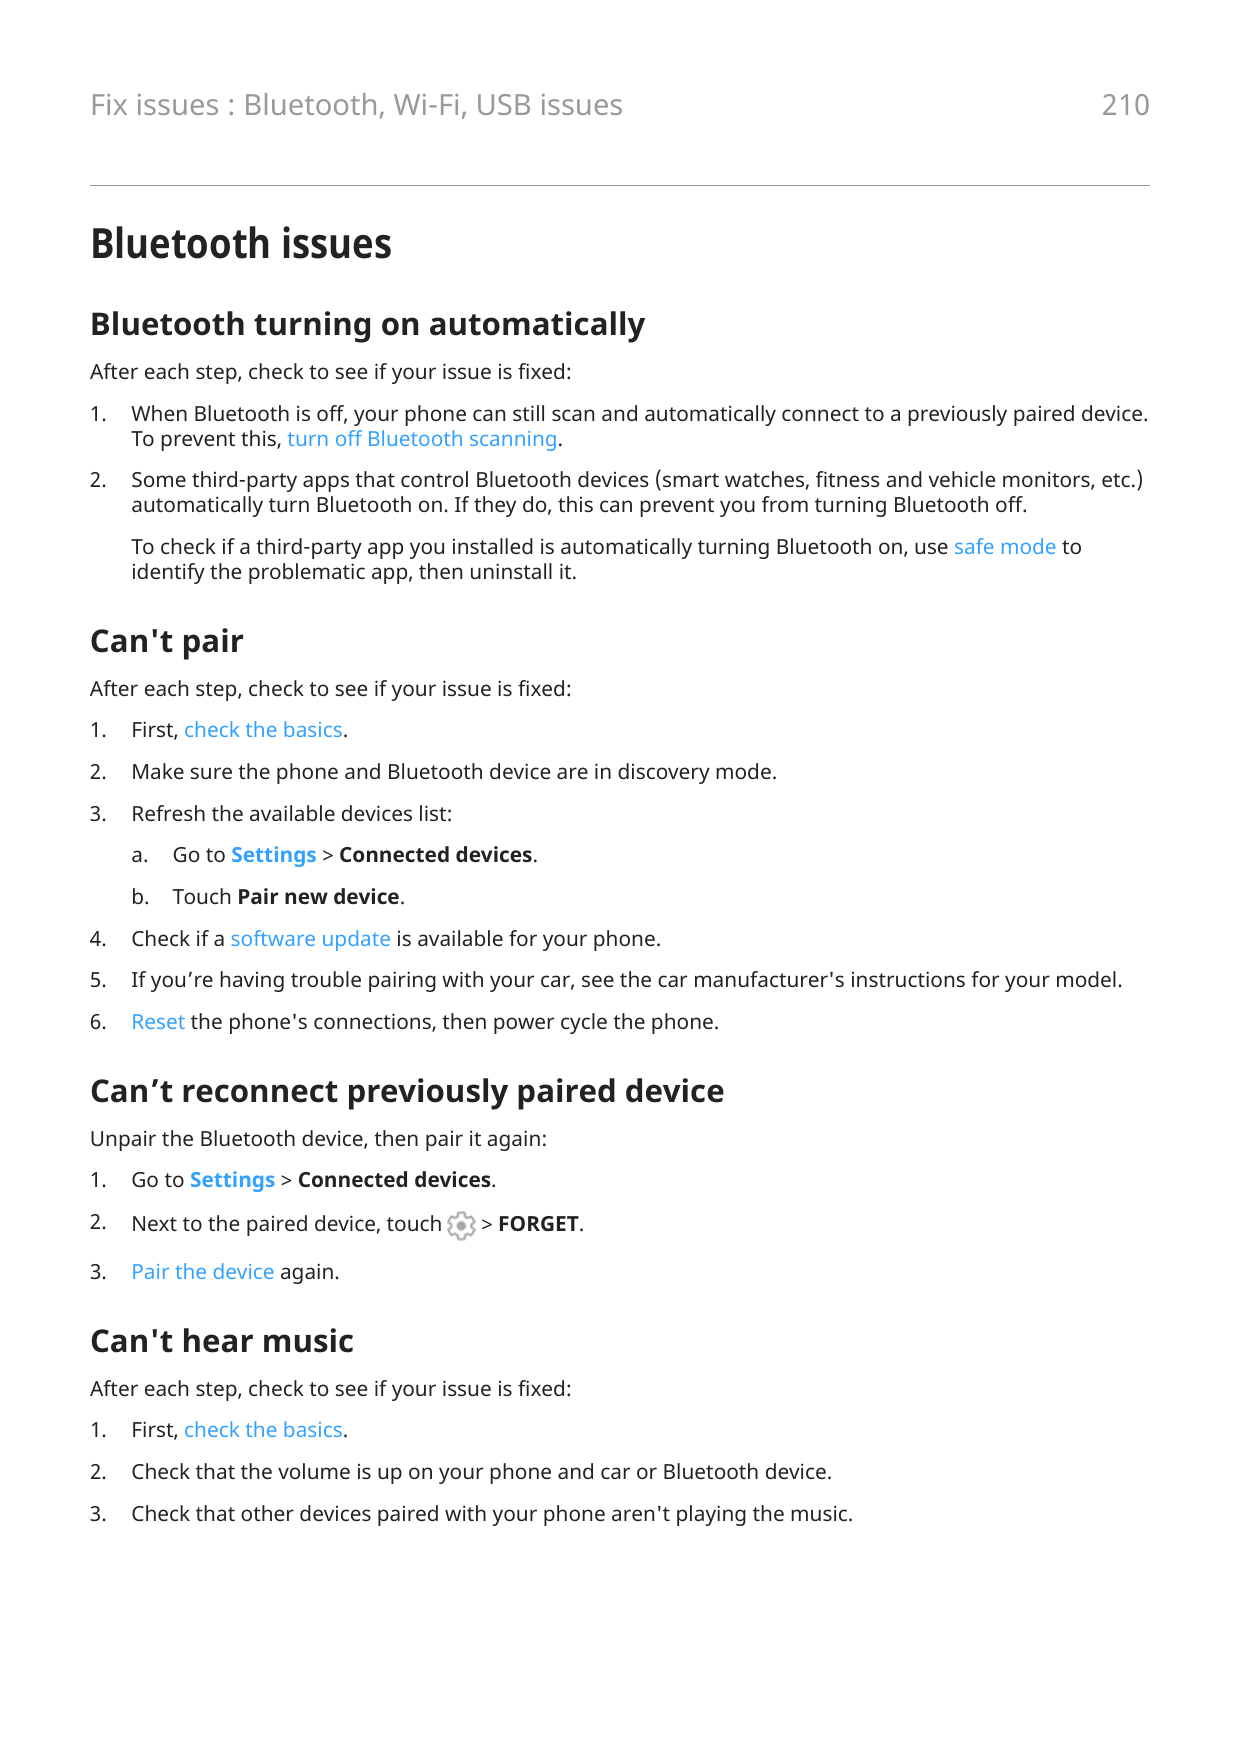 Fix issues : Bluetooth, Wi-Fi, USB issues210Bluetooth issuesBluetooth turning on automaticallyAfter each step, check to see if y